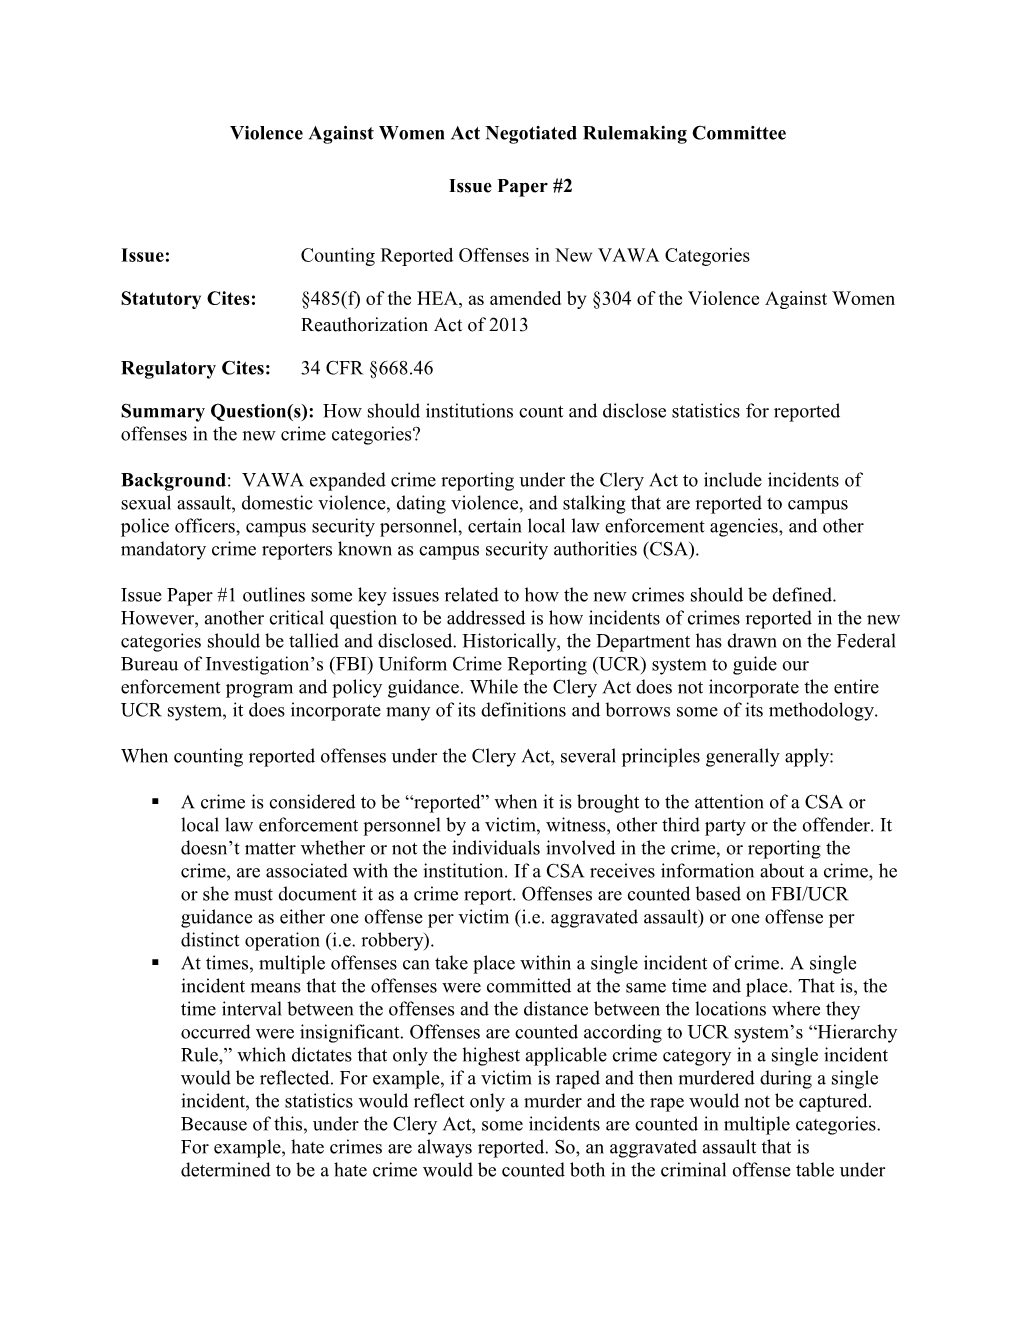 Negotiated Rulemaking for Higher Education 2012-2014: VAWA Issue Paper 2, Counting Reported